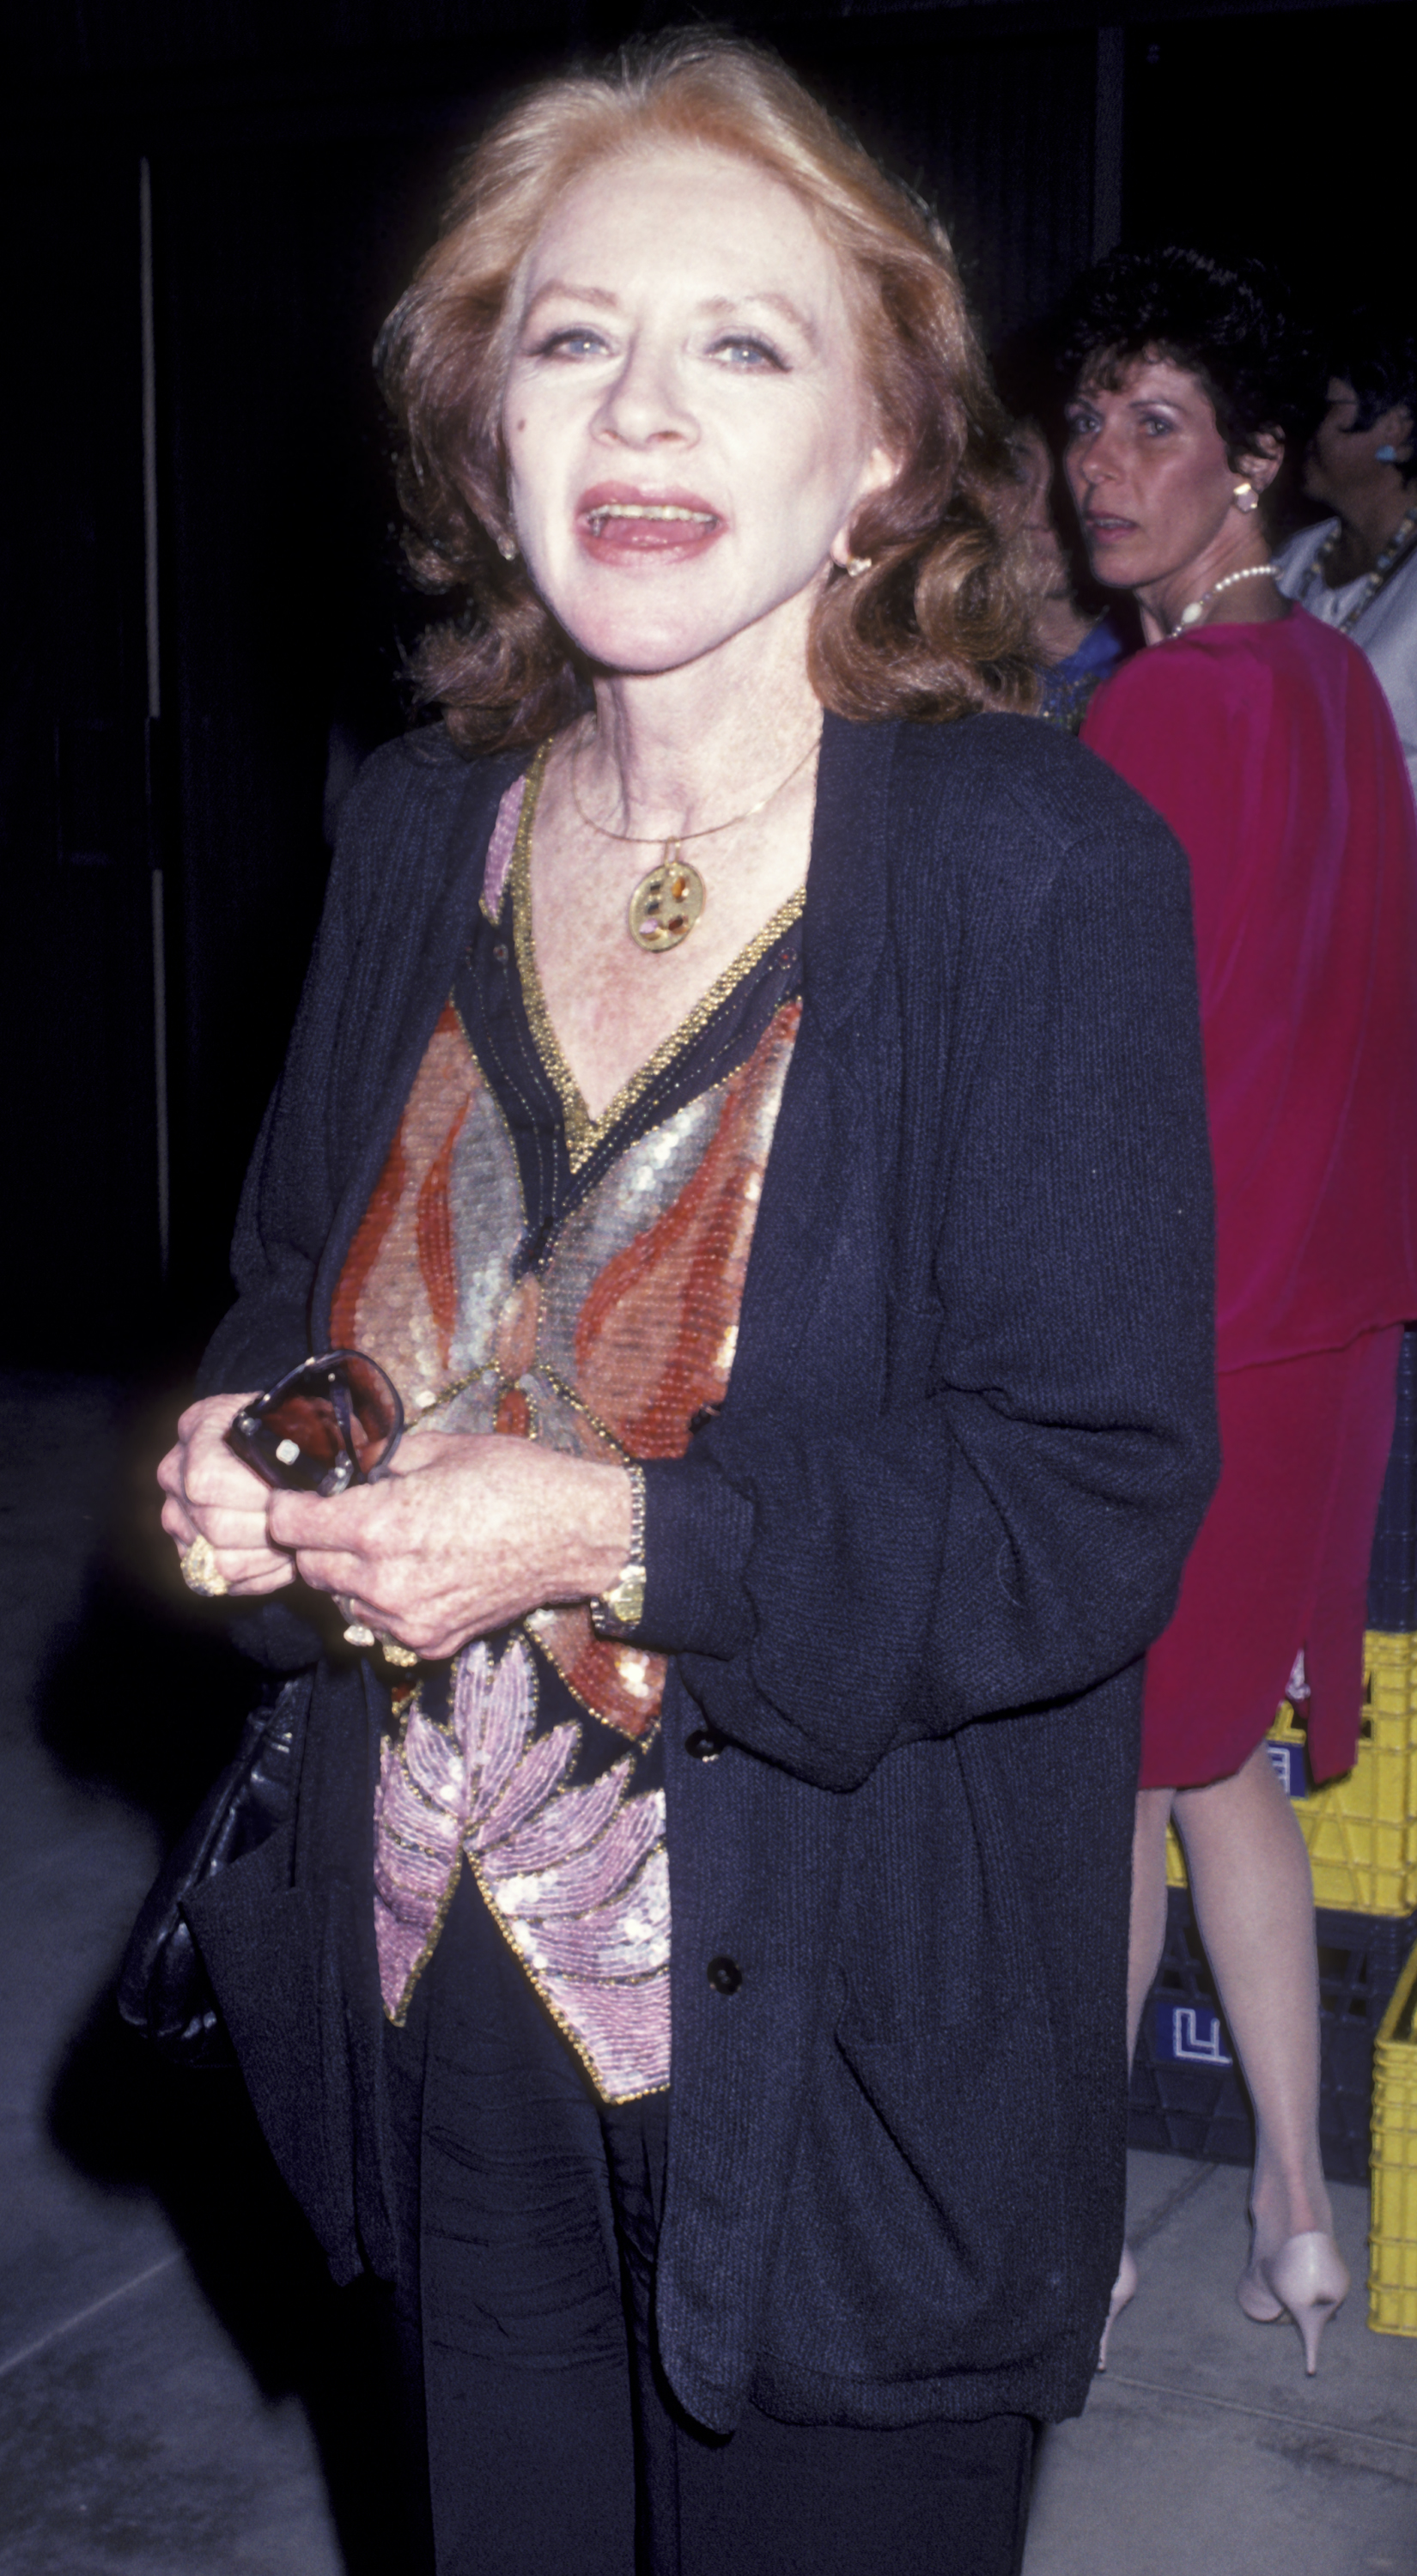 Amanda Blake attends the screening of "Samaritan" at the Academy Theater on May 1, 1986, in Beverly Hills, California. | Source: Getty Images